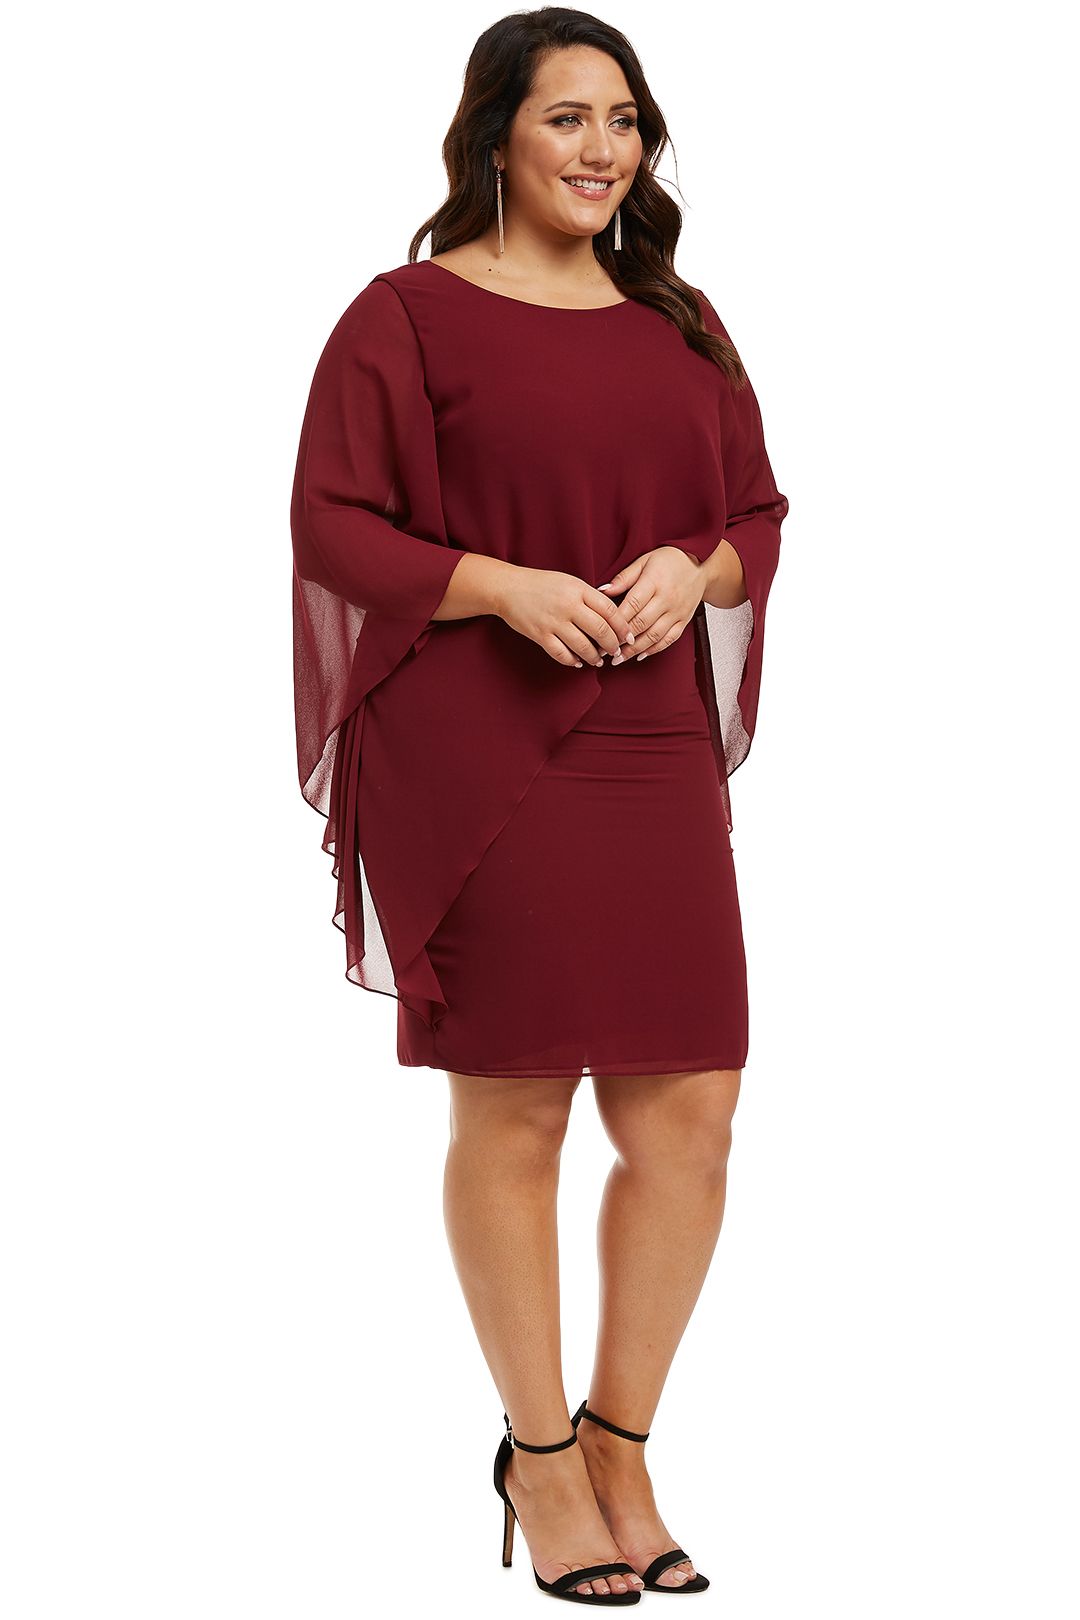 Montique-Ciana Cocktail Dress Wine-Wine-Side